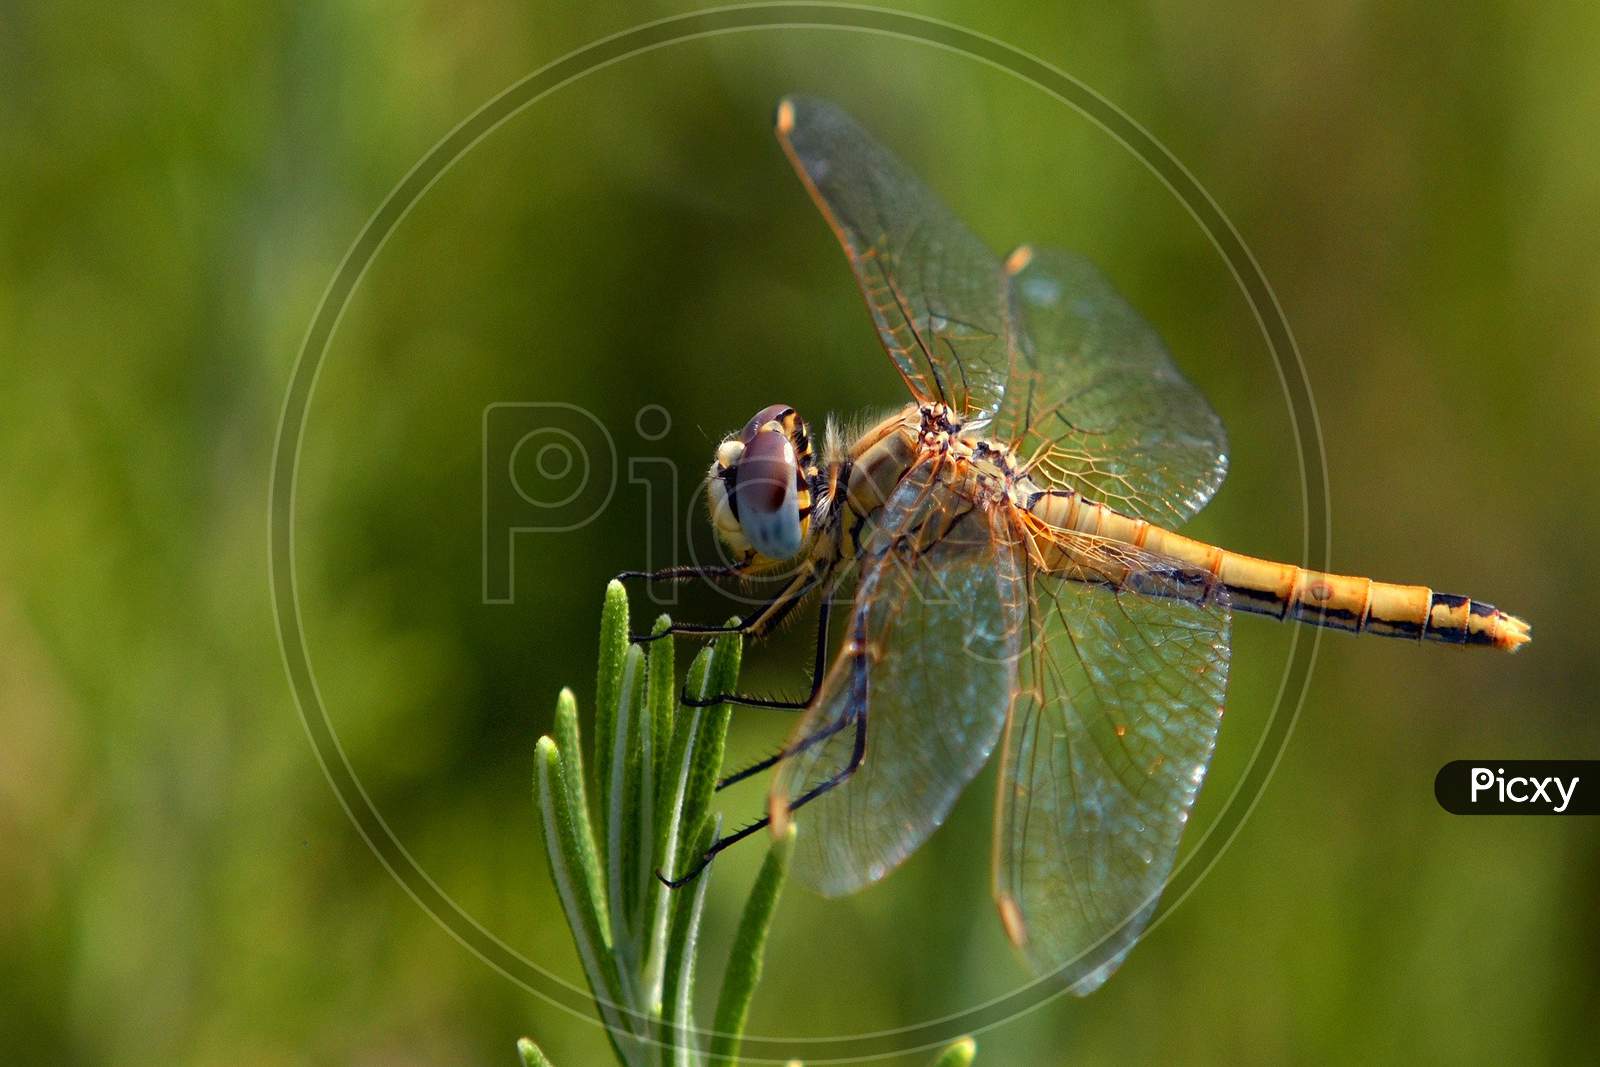 Dragonfly. Taken date-15/August/2020.place-seoni